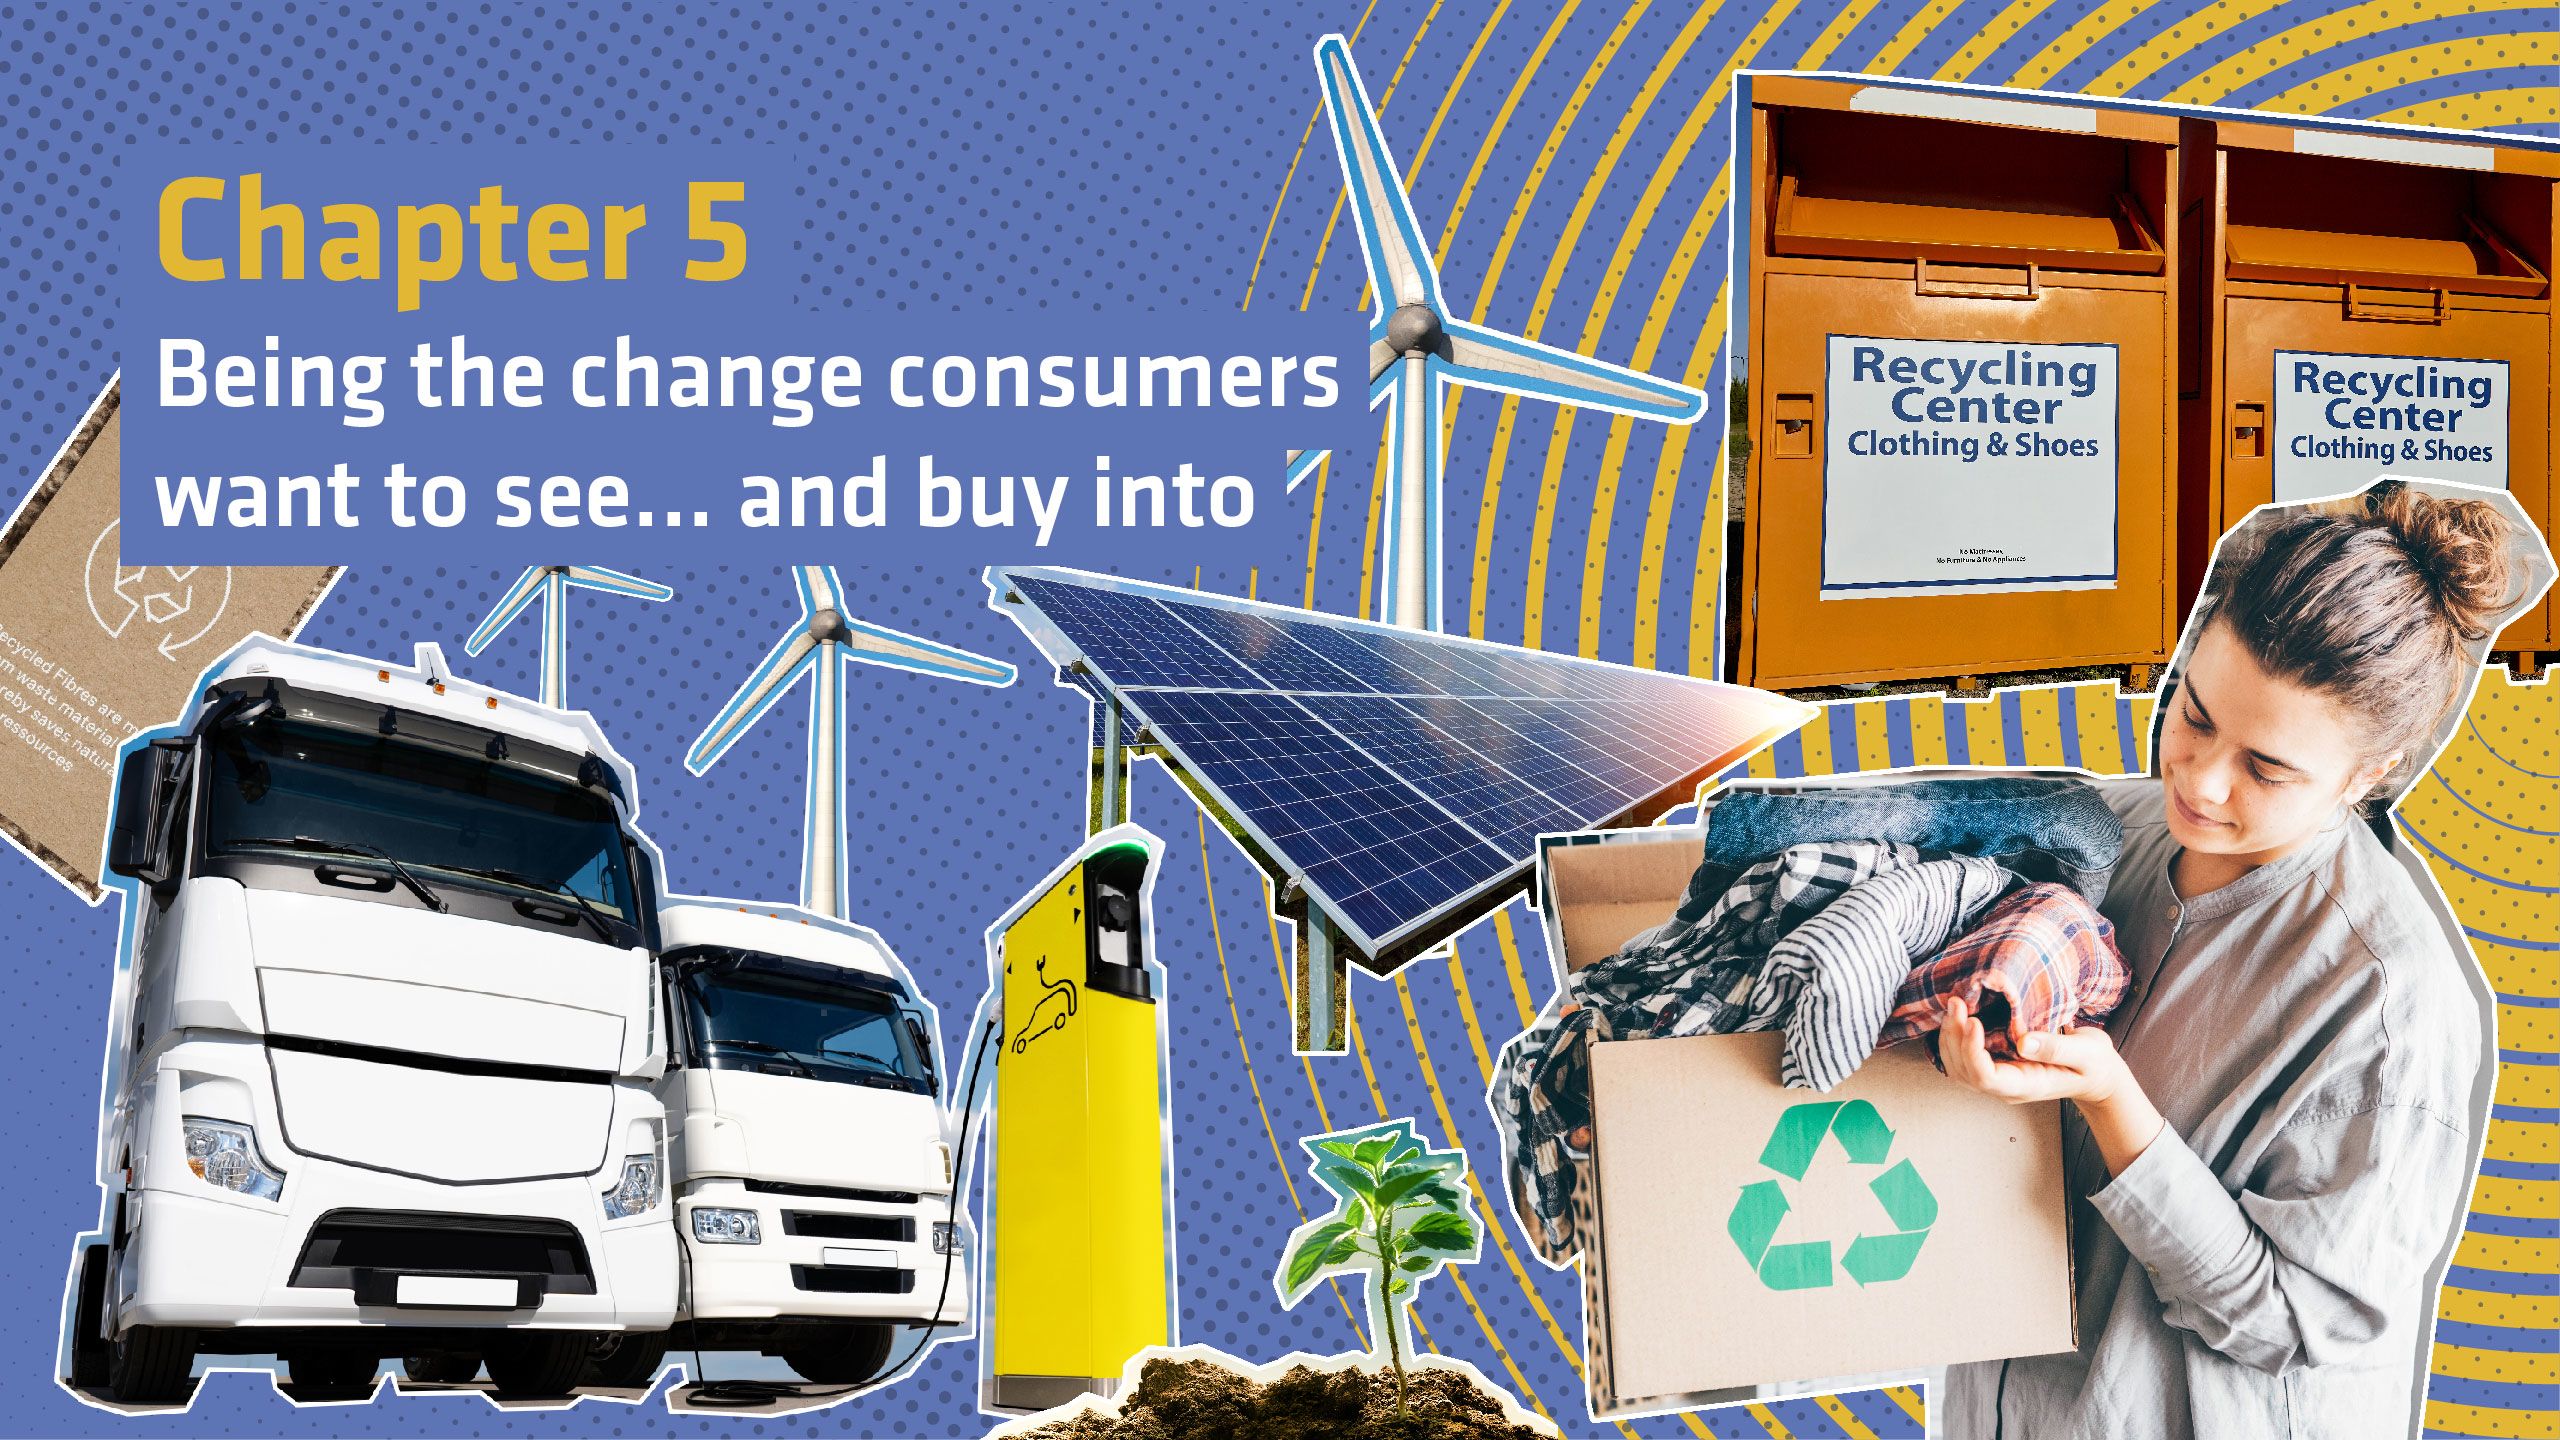 Collage image shows electric vehicles, wind farms, solar panels, a customer opening a box of garments with a recycled symbol, recycling bins and a plant growing out of soil. Text reads: Chapter 5: Being the change consumers want to see… and buy into